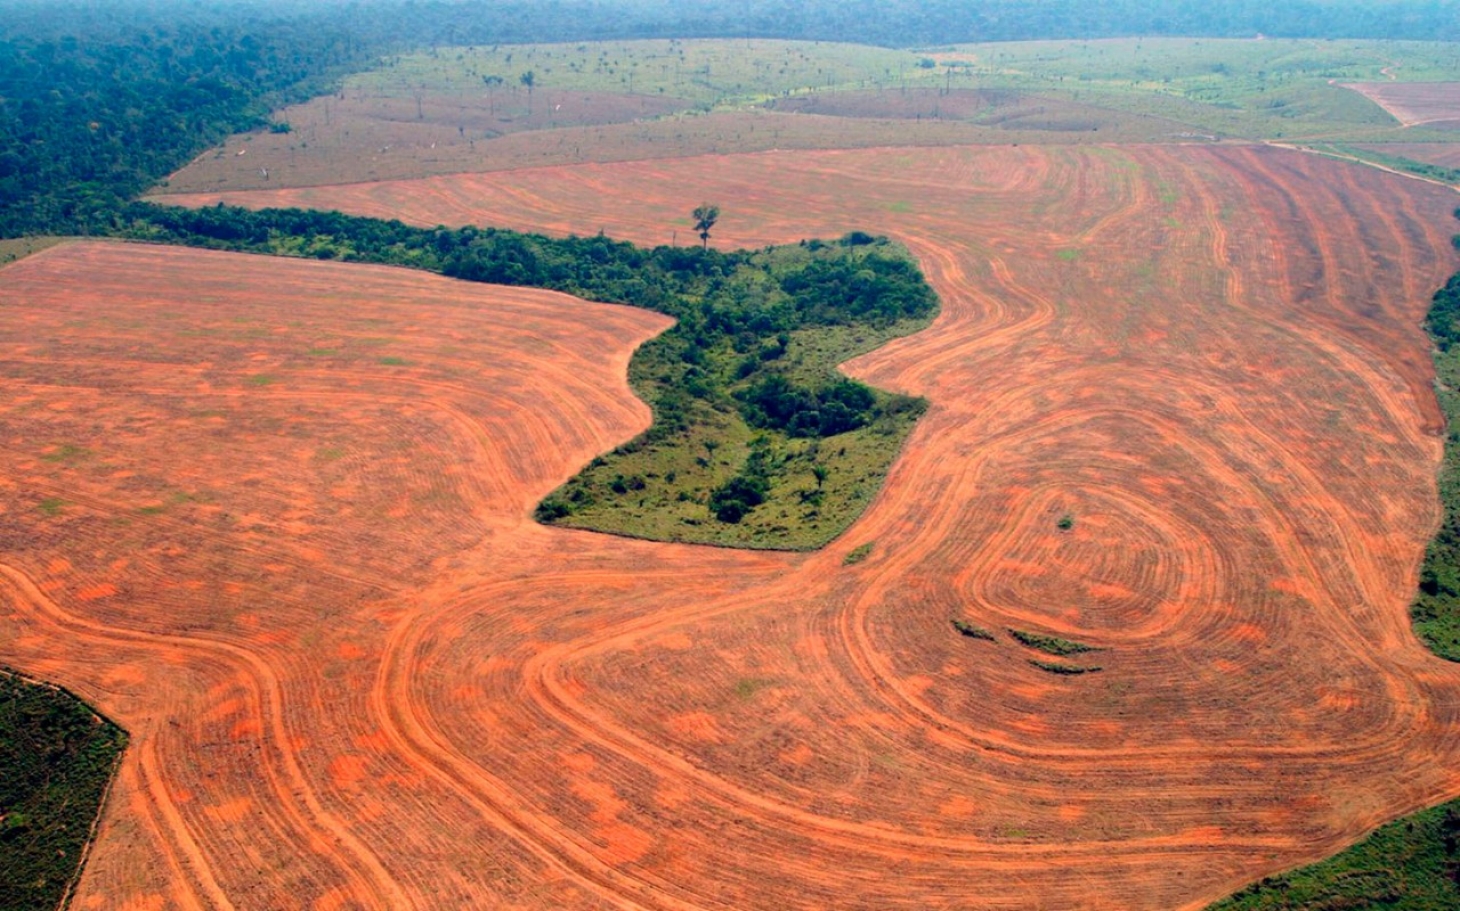 A depiction of the deforestation occurring in the Amazon